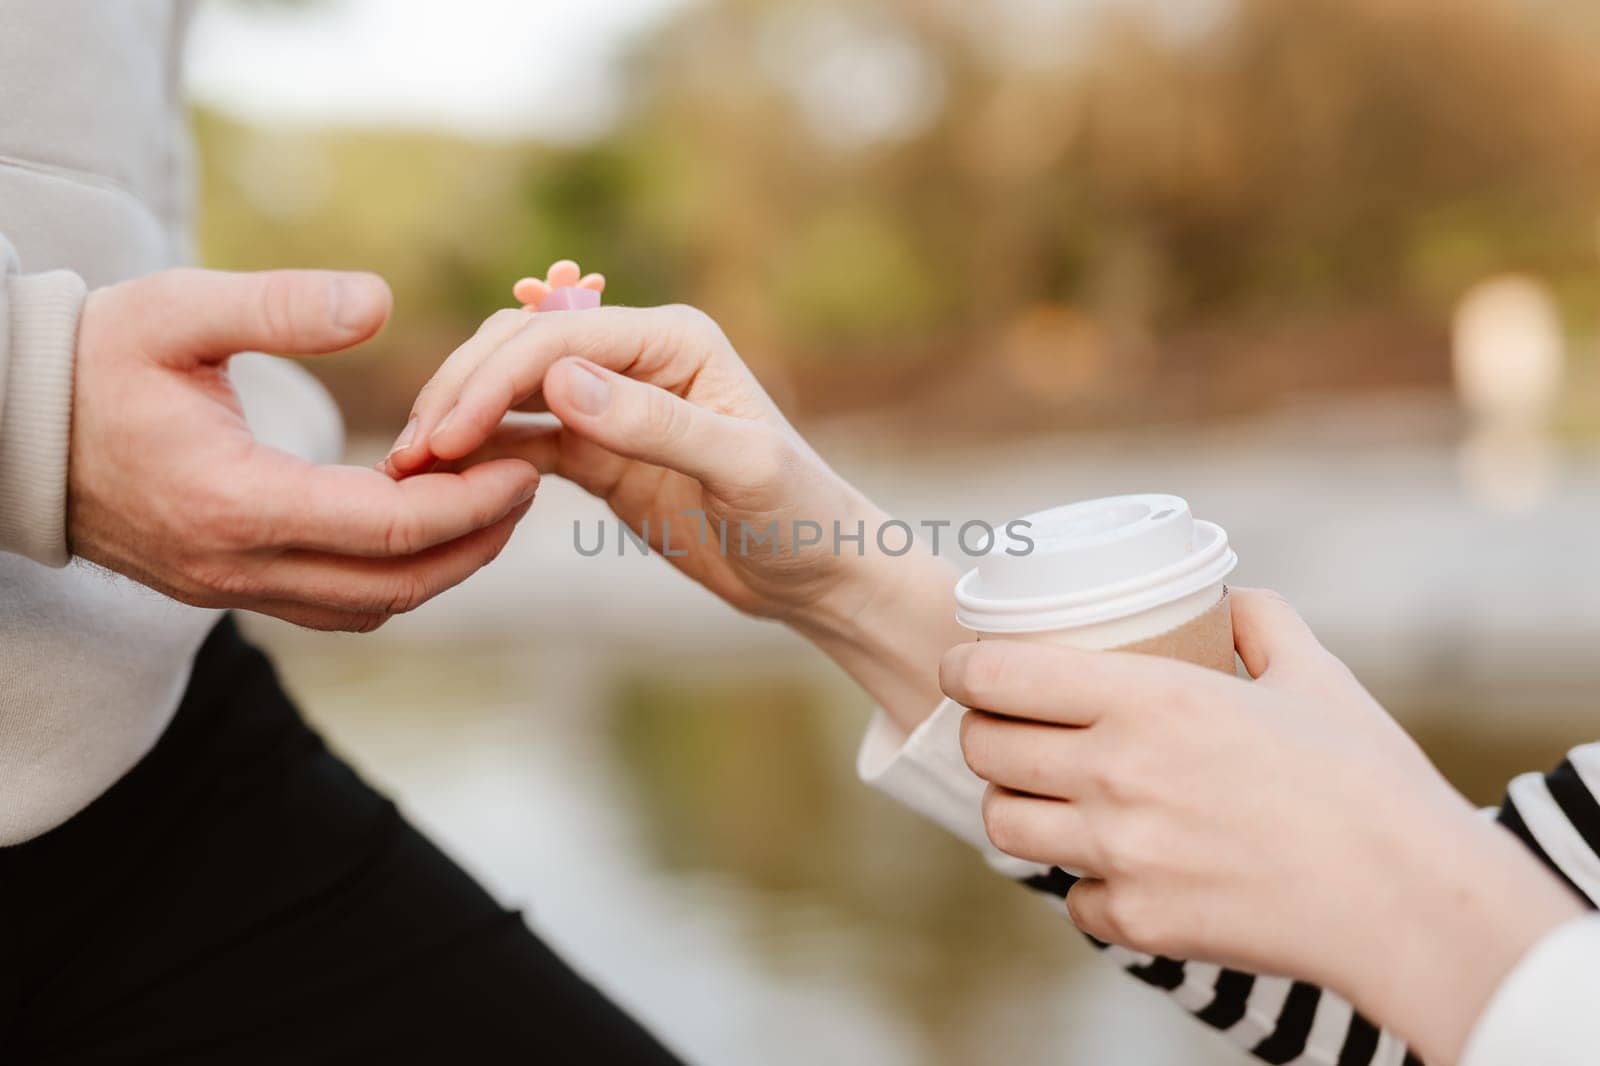 woman and man holding hands. Shallow dof